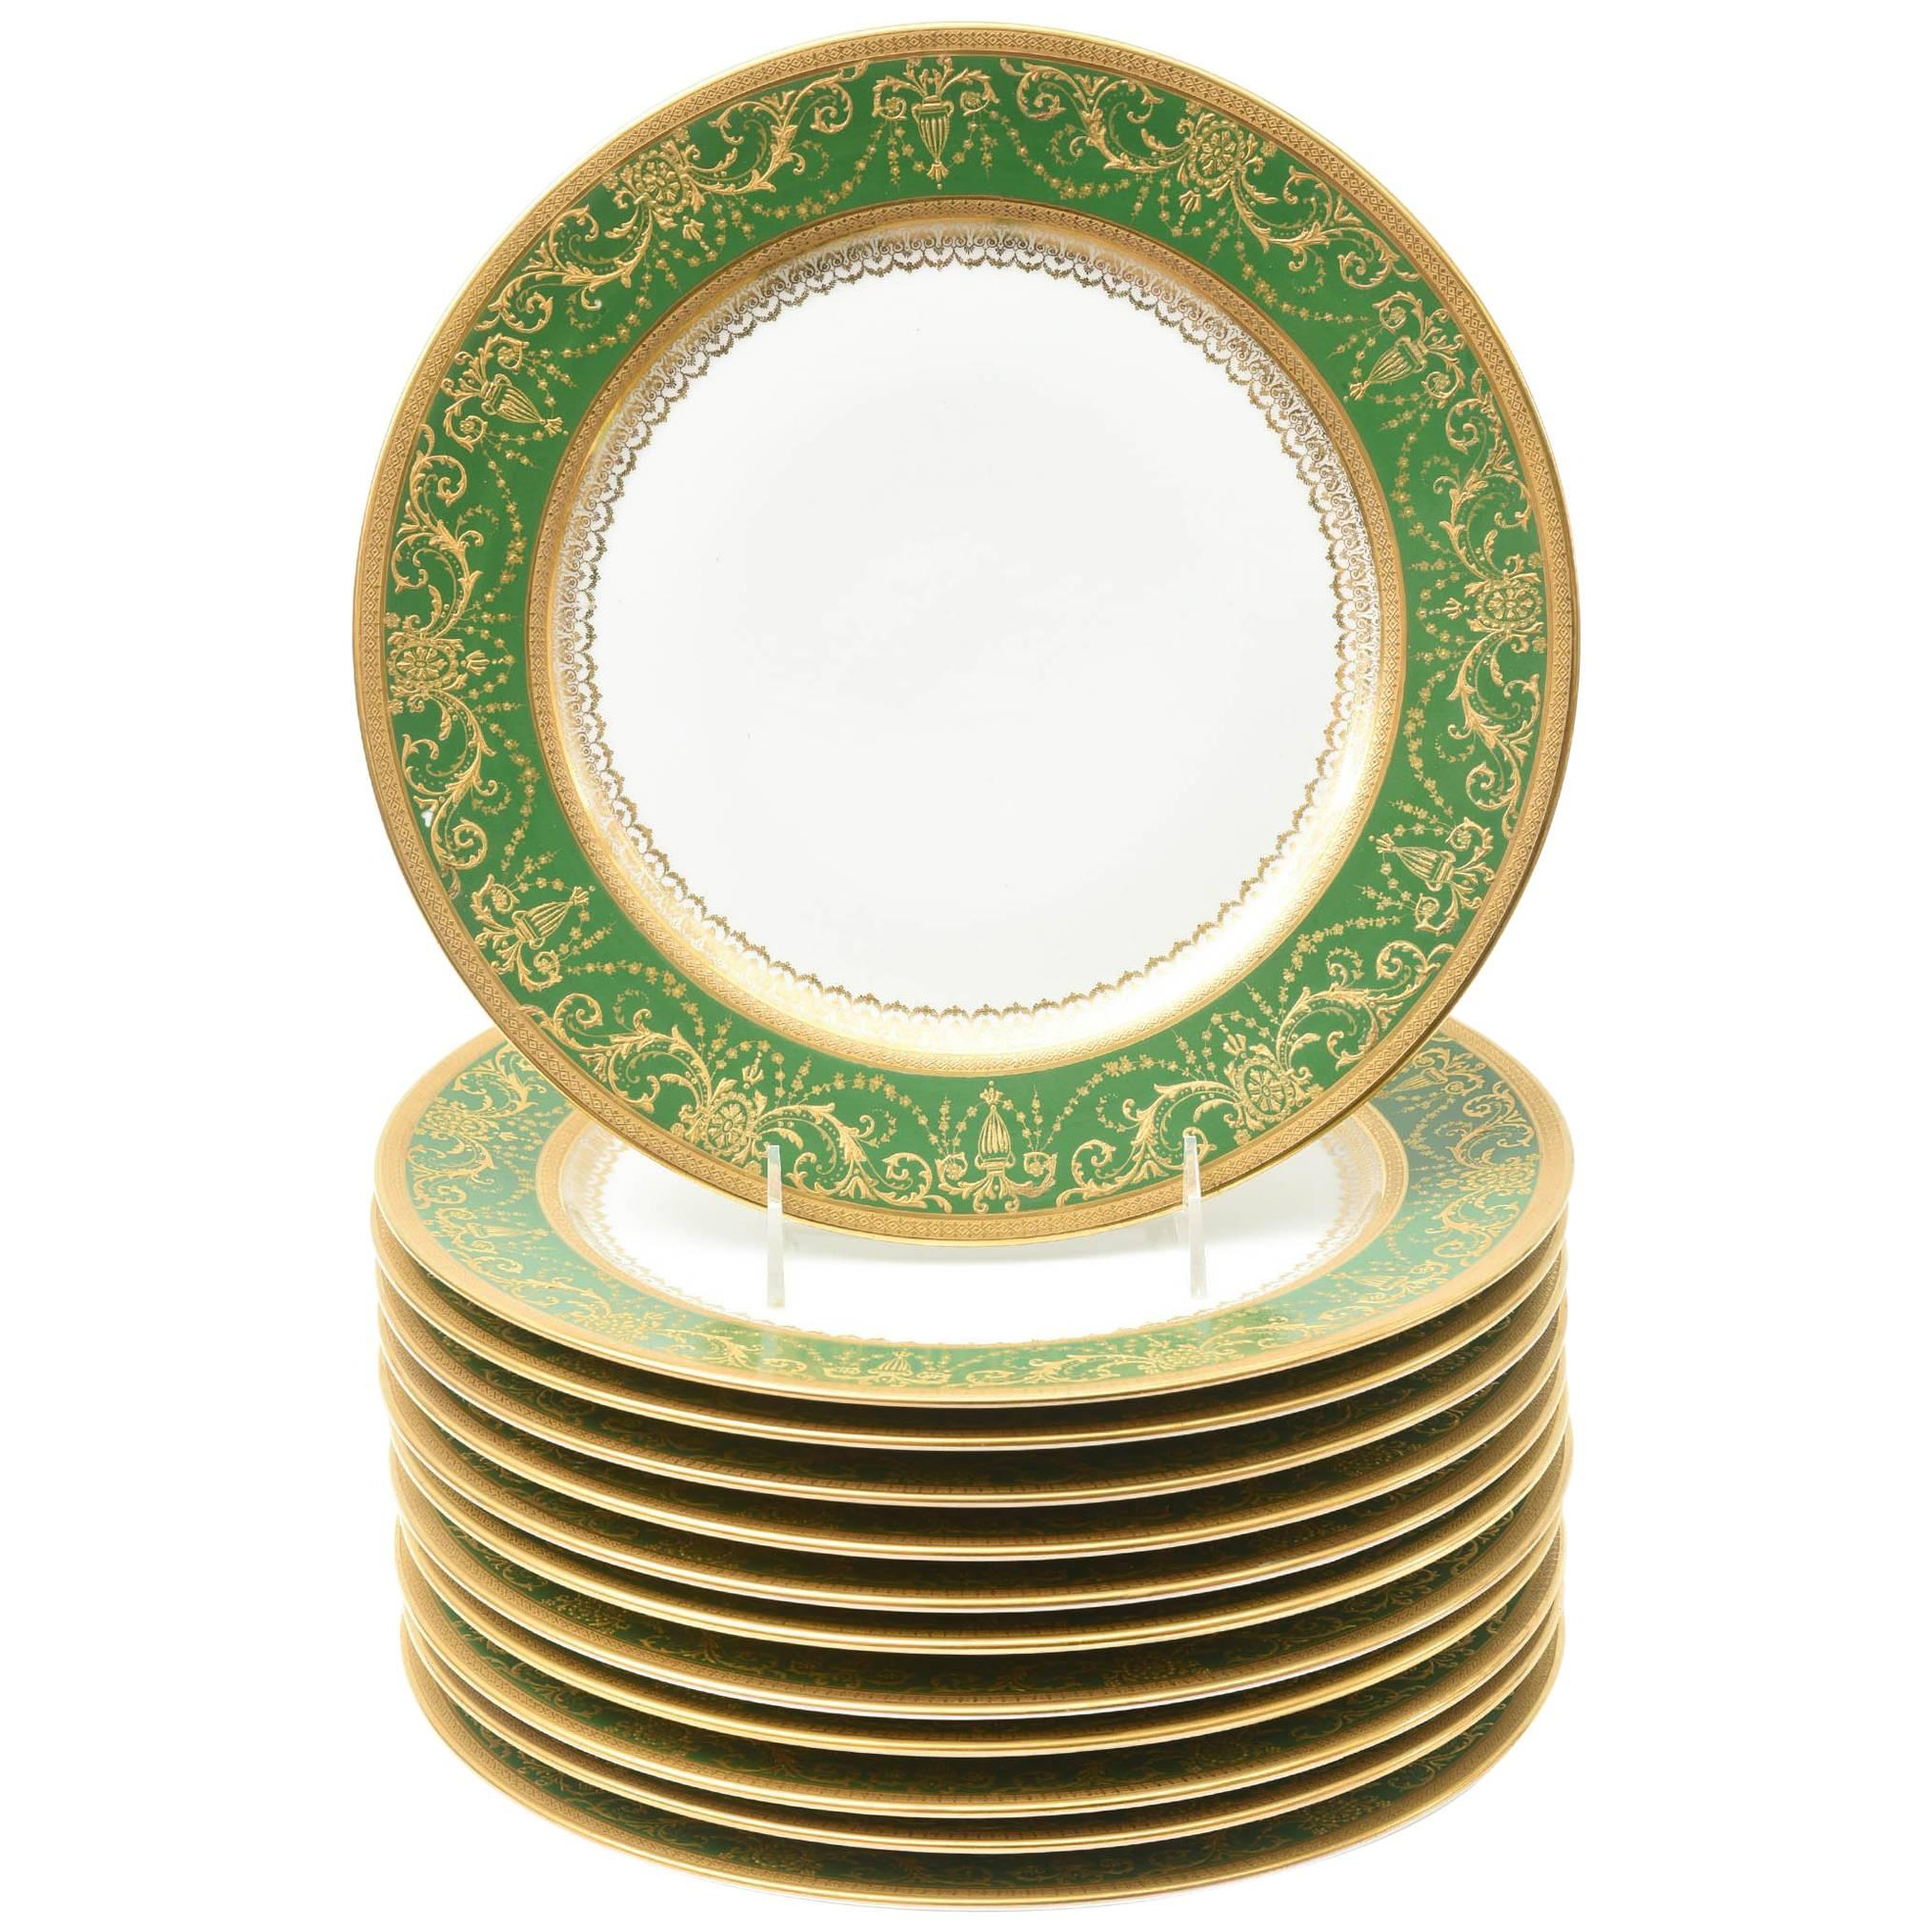 12 Antique French Rich Green and Heavily Gilded Dinner Plates, Oversized